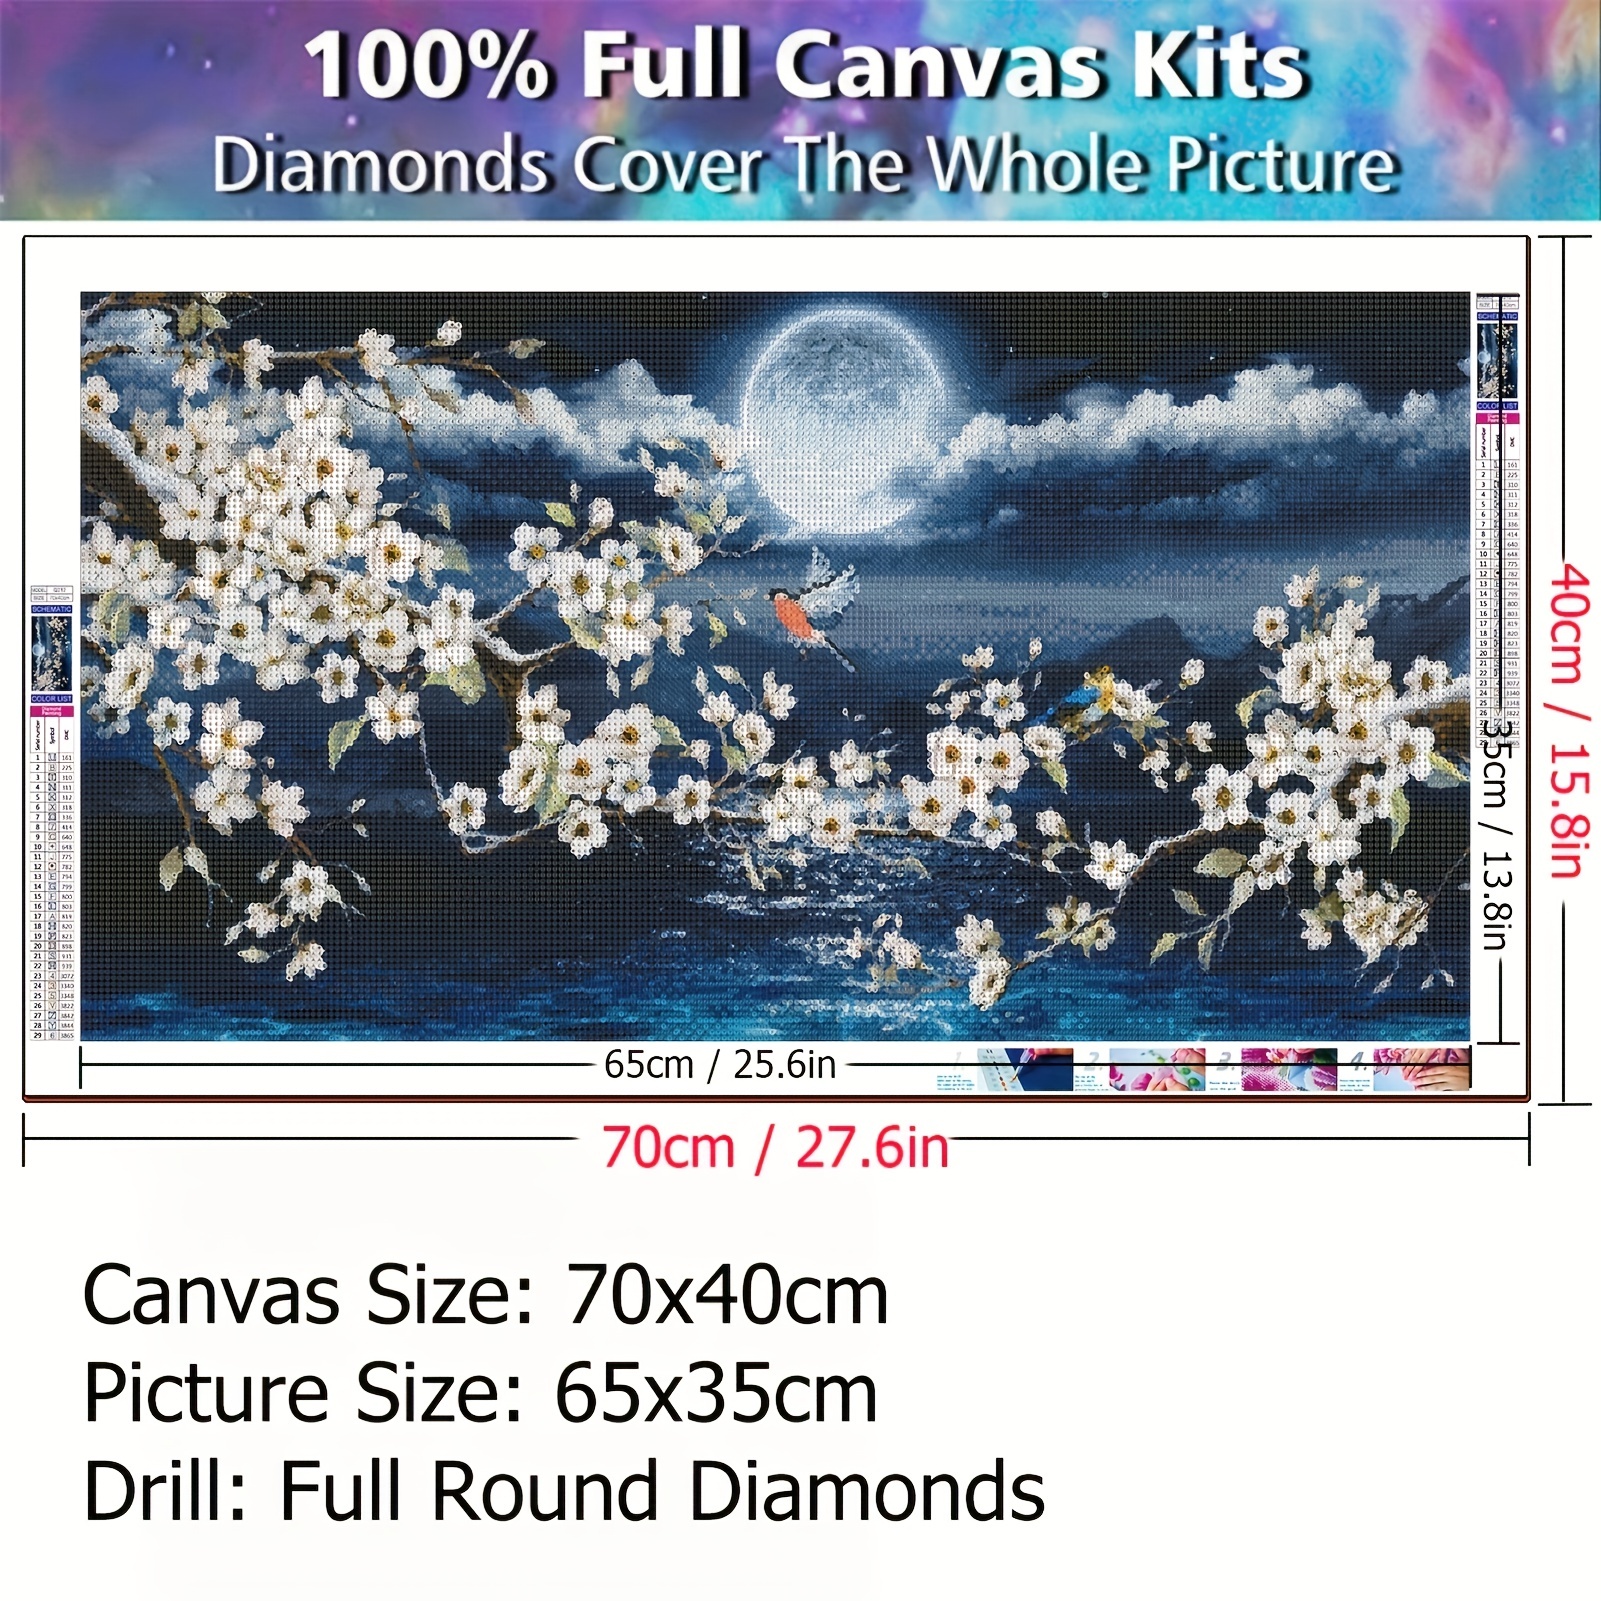 YALKIN Waterfall Landscape Large Diamond Painting Kits for Adults (27.6 x  13.8 inch), Full Round Drill DIY for Home Wall Decor 